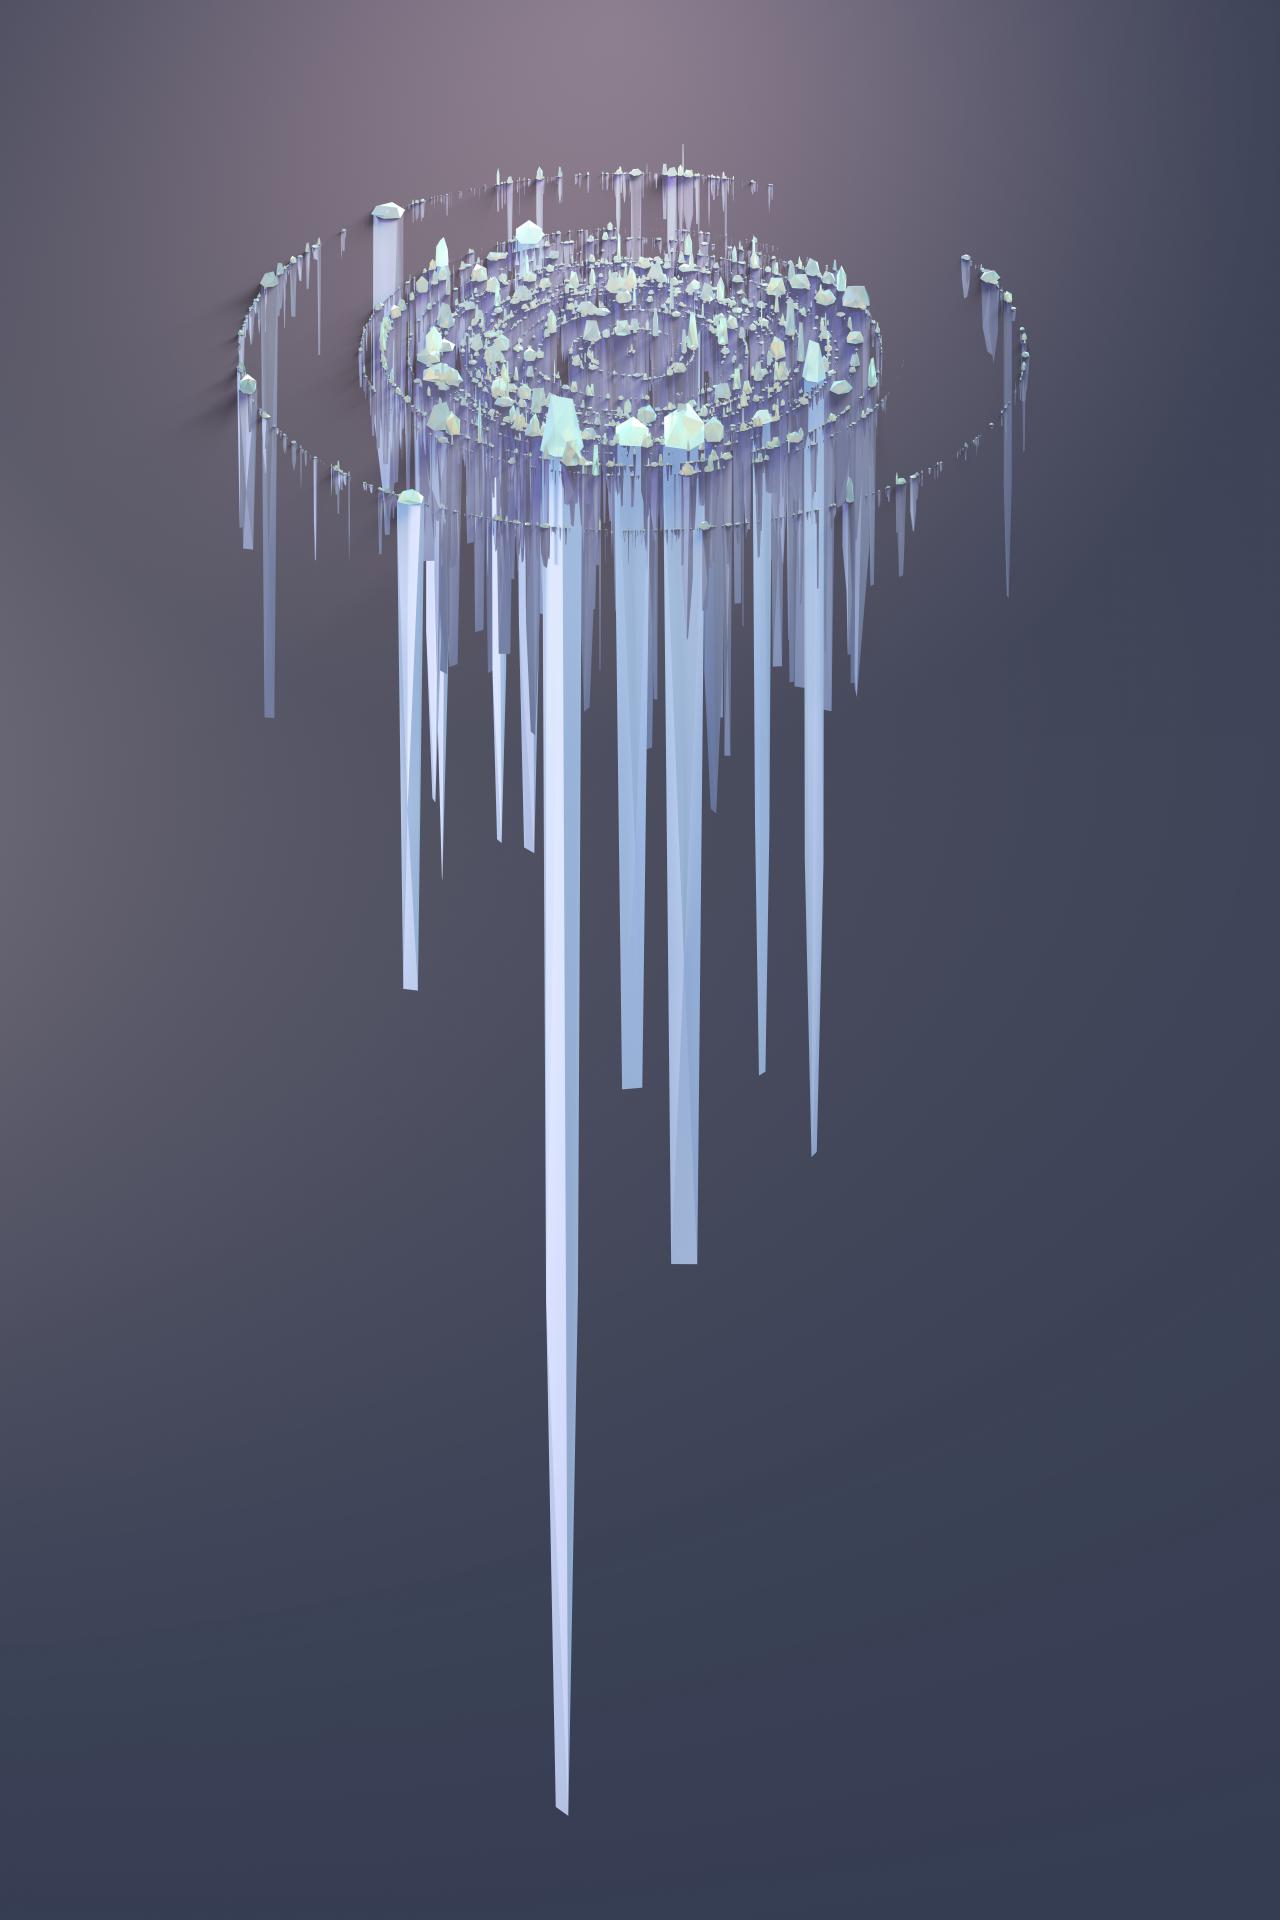 Circular structures floating in empty space that look like icicles in different lengths